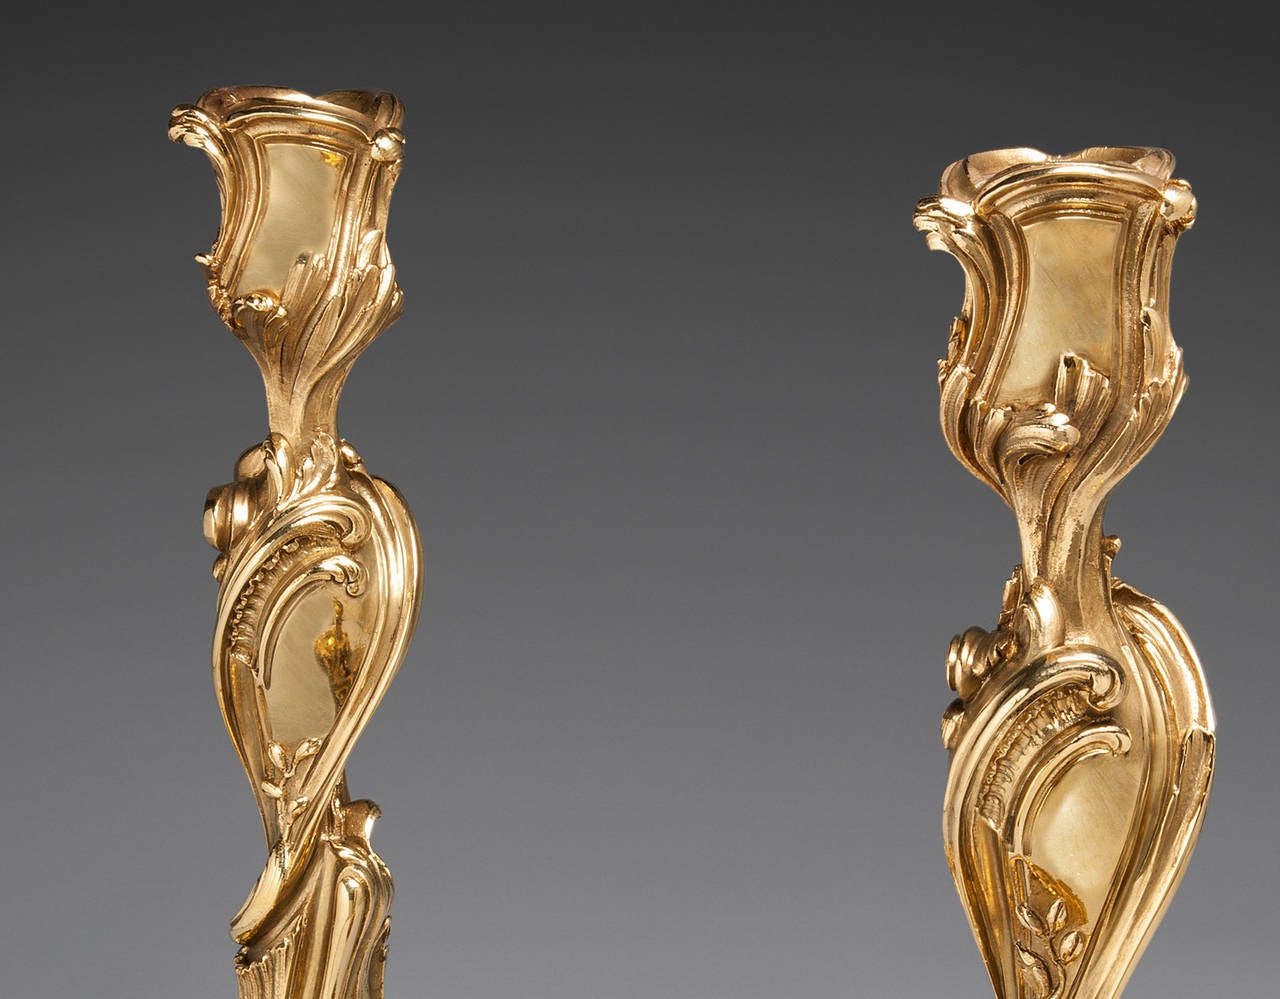 A pair of mid-19th century Rococo Revival gilt bronze candlesticks in the Louis XV style, the bold scrollwork and naturalistic sprigs of foliage reminiscent of the designs of J.-A. Meissonier.